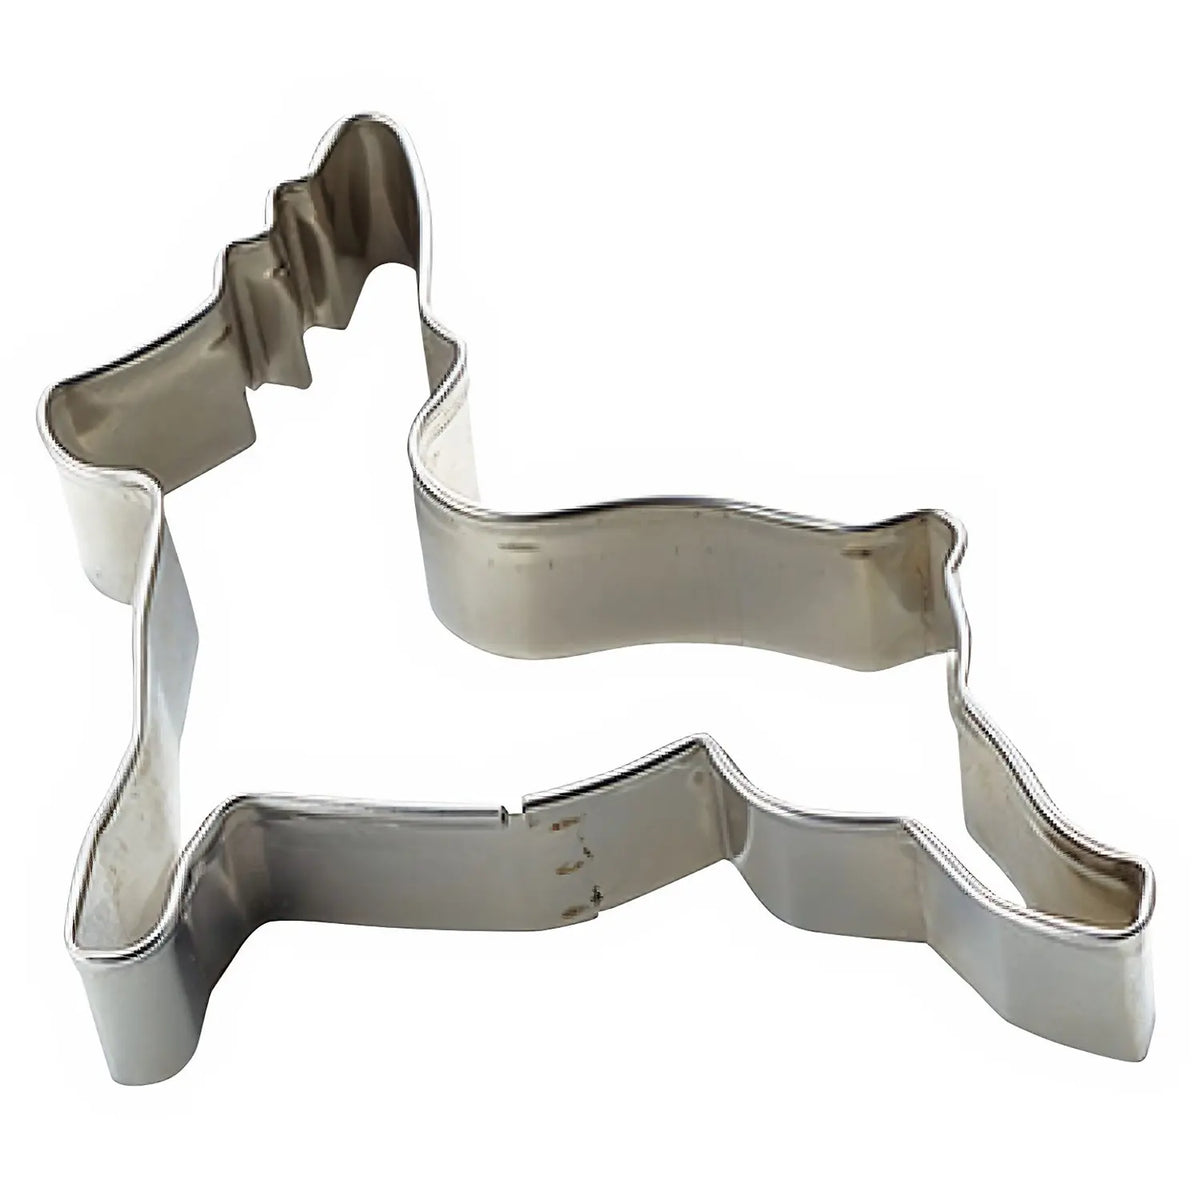 TIGERCROWN Cake Land Stainless Steel Cookie Cutter Reindeer